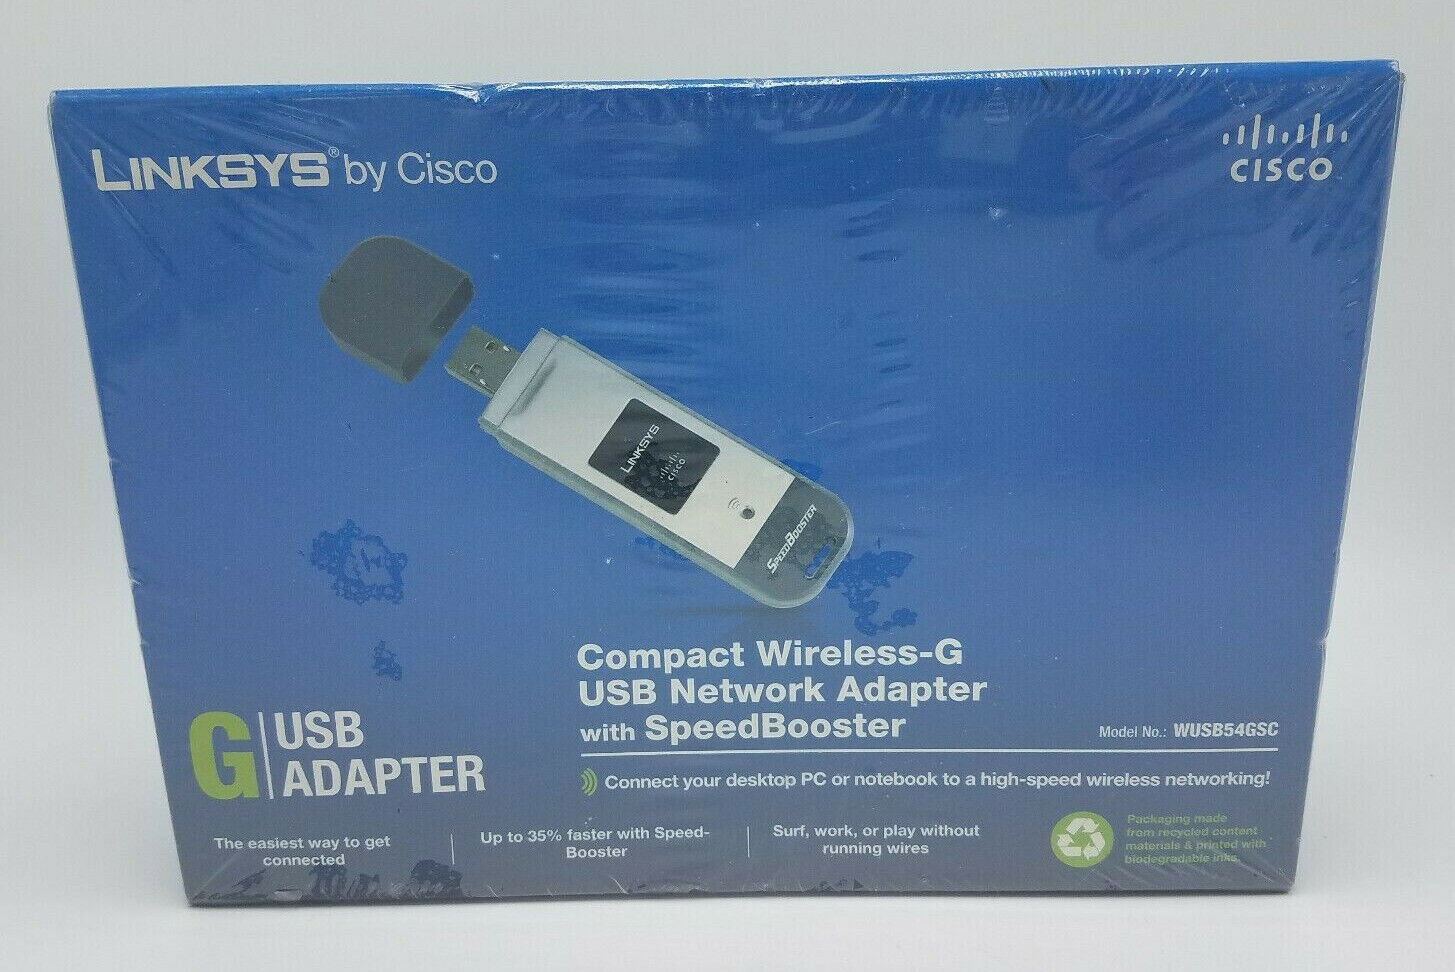 Cisco-Linksys WUSB54GSC Compact Wireless-G USB Network Adapter with SpeedBooster